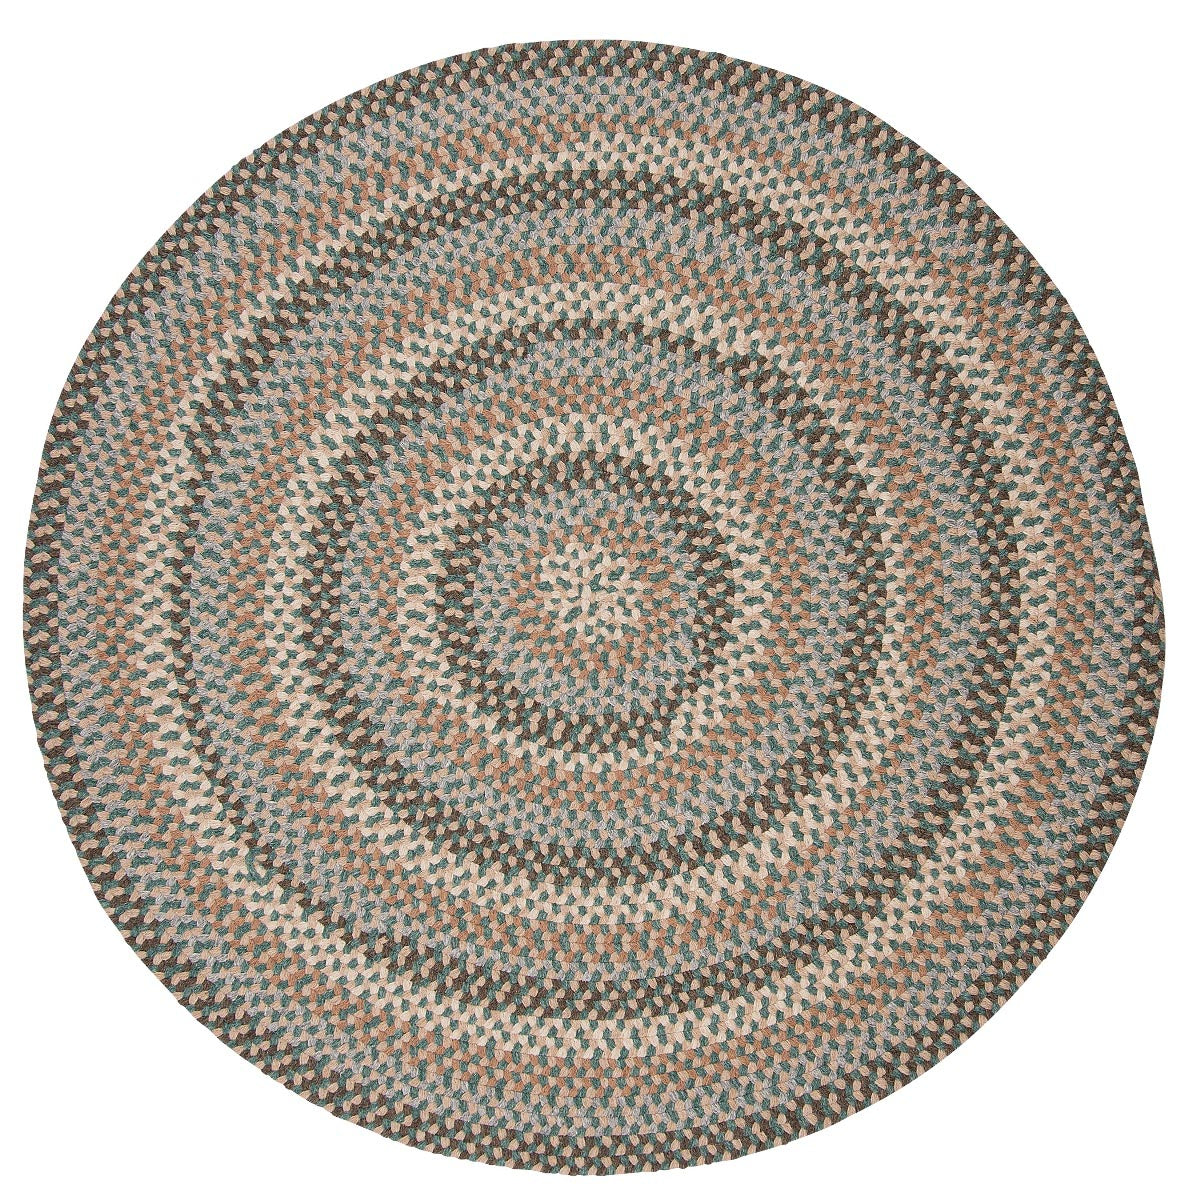 Boston Common Driftwood Teal Outdoor Braided Round Rugs